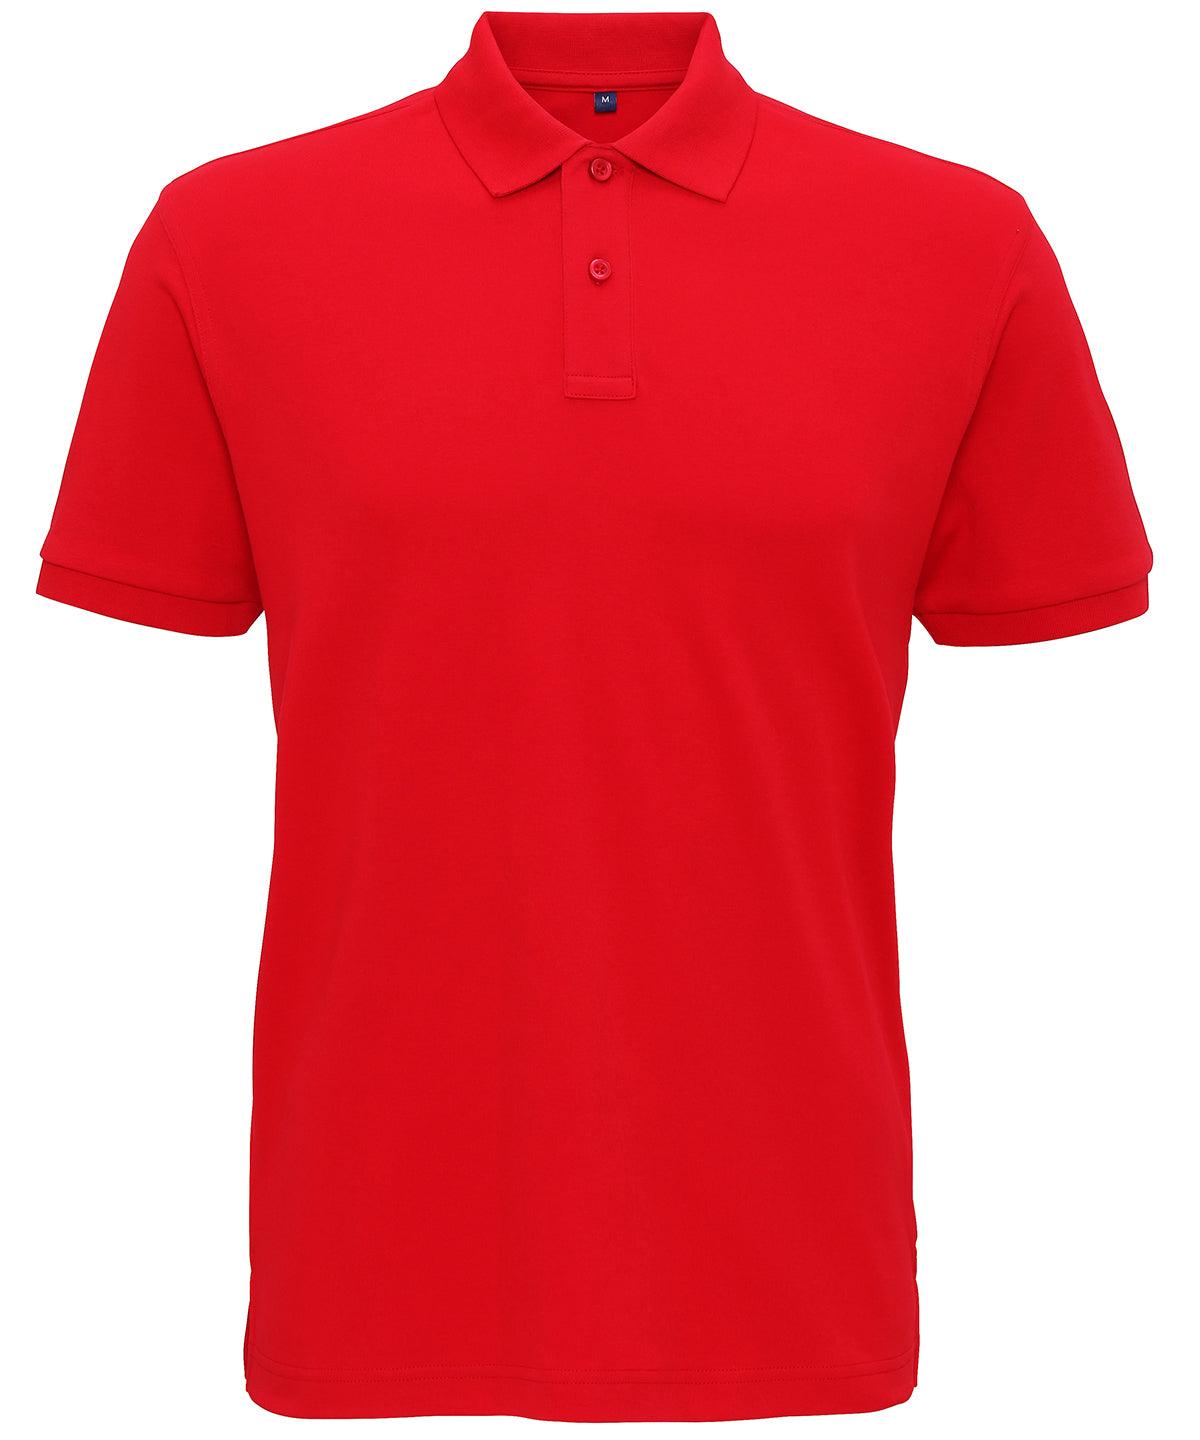 Cherry Red - Men's super smooth knit polo Polos Asquith & Fox Must Haves, Perfect for DTG print, Plus Sizes, Polos & Casual, Raladeal - Recently Added Schoolwear Centres